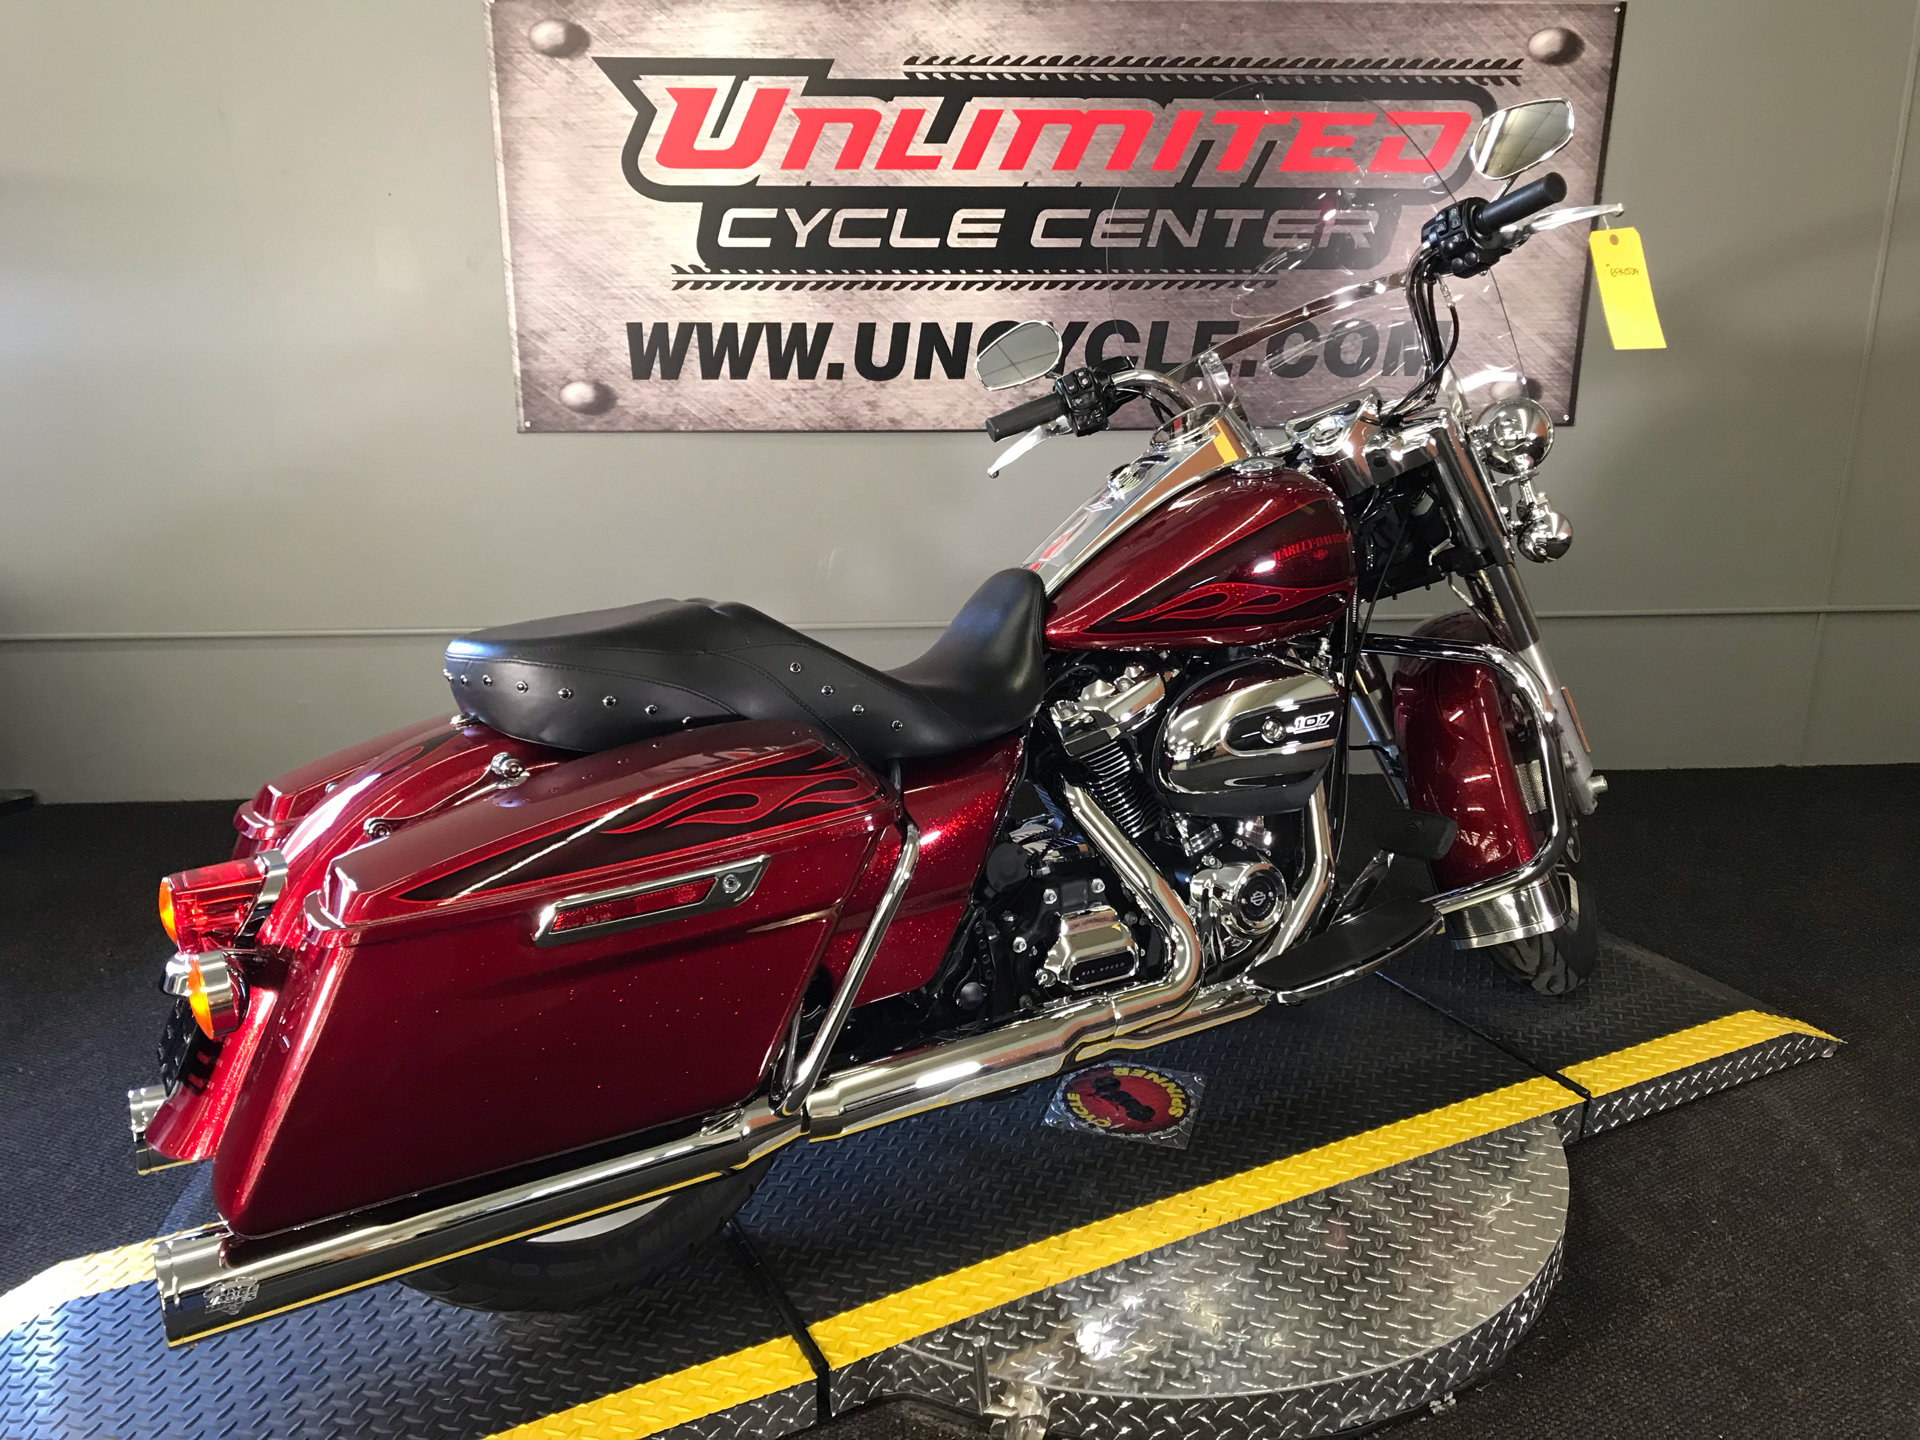 Used 2017 Harley Davidson Road King Motorcycles In Tyrone Pa 694539 Hard Candy Hot Rod Red Flake